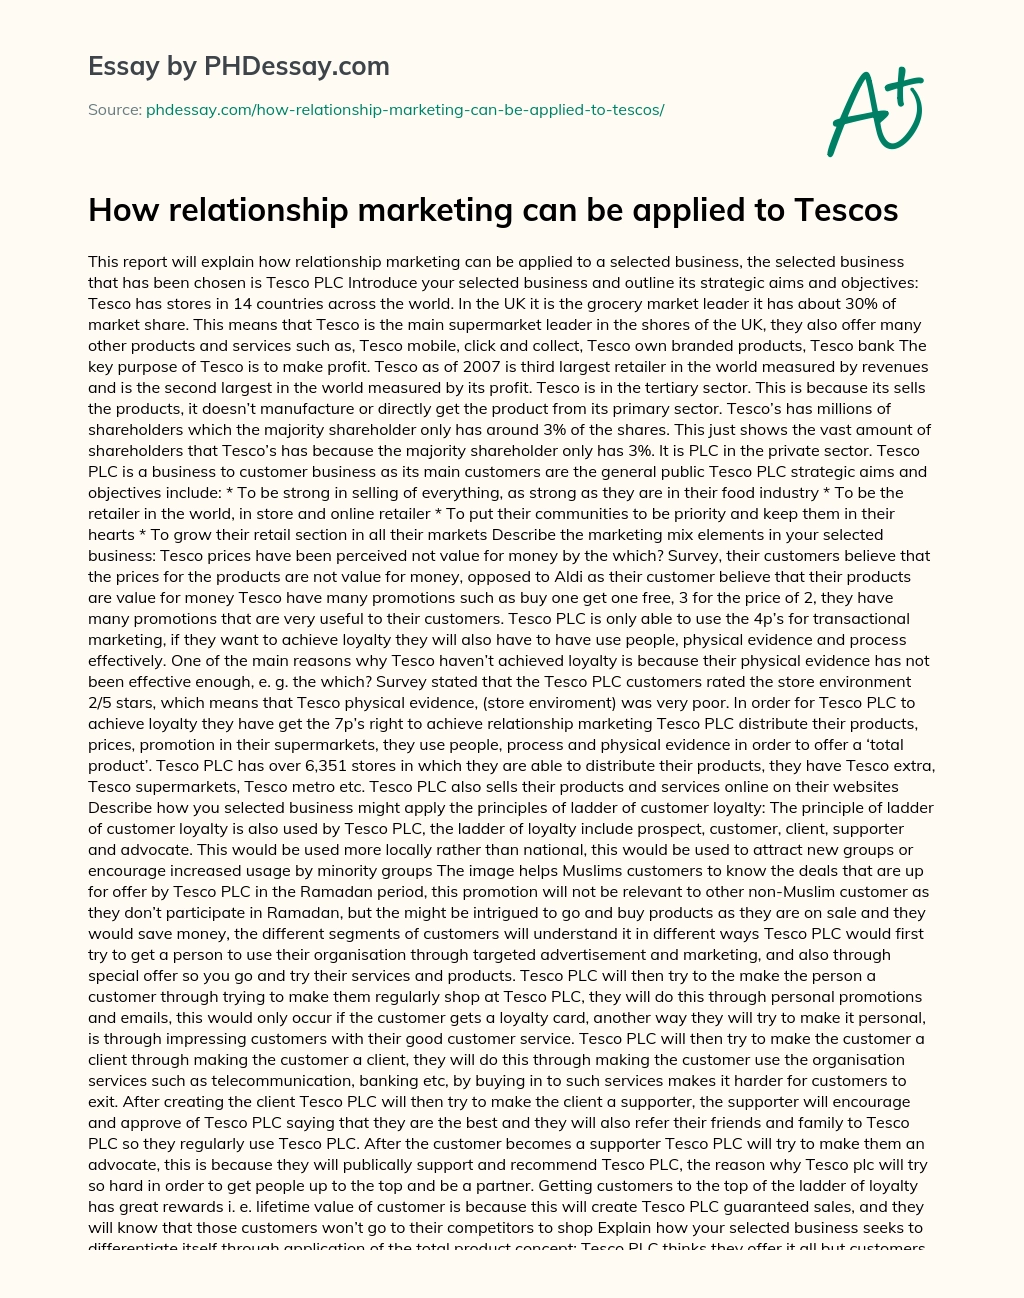 How relationship marketing can be applied to Tescos essay